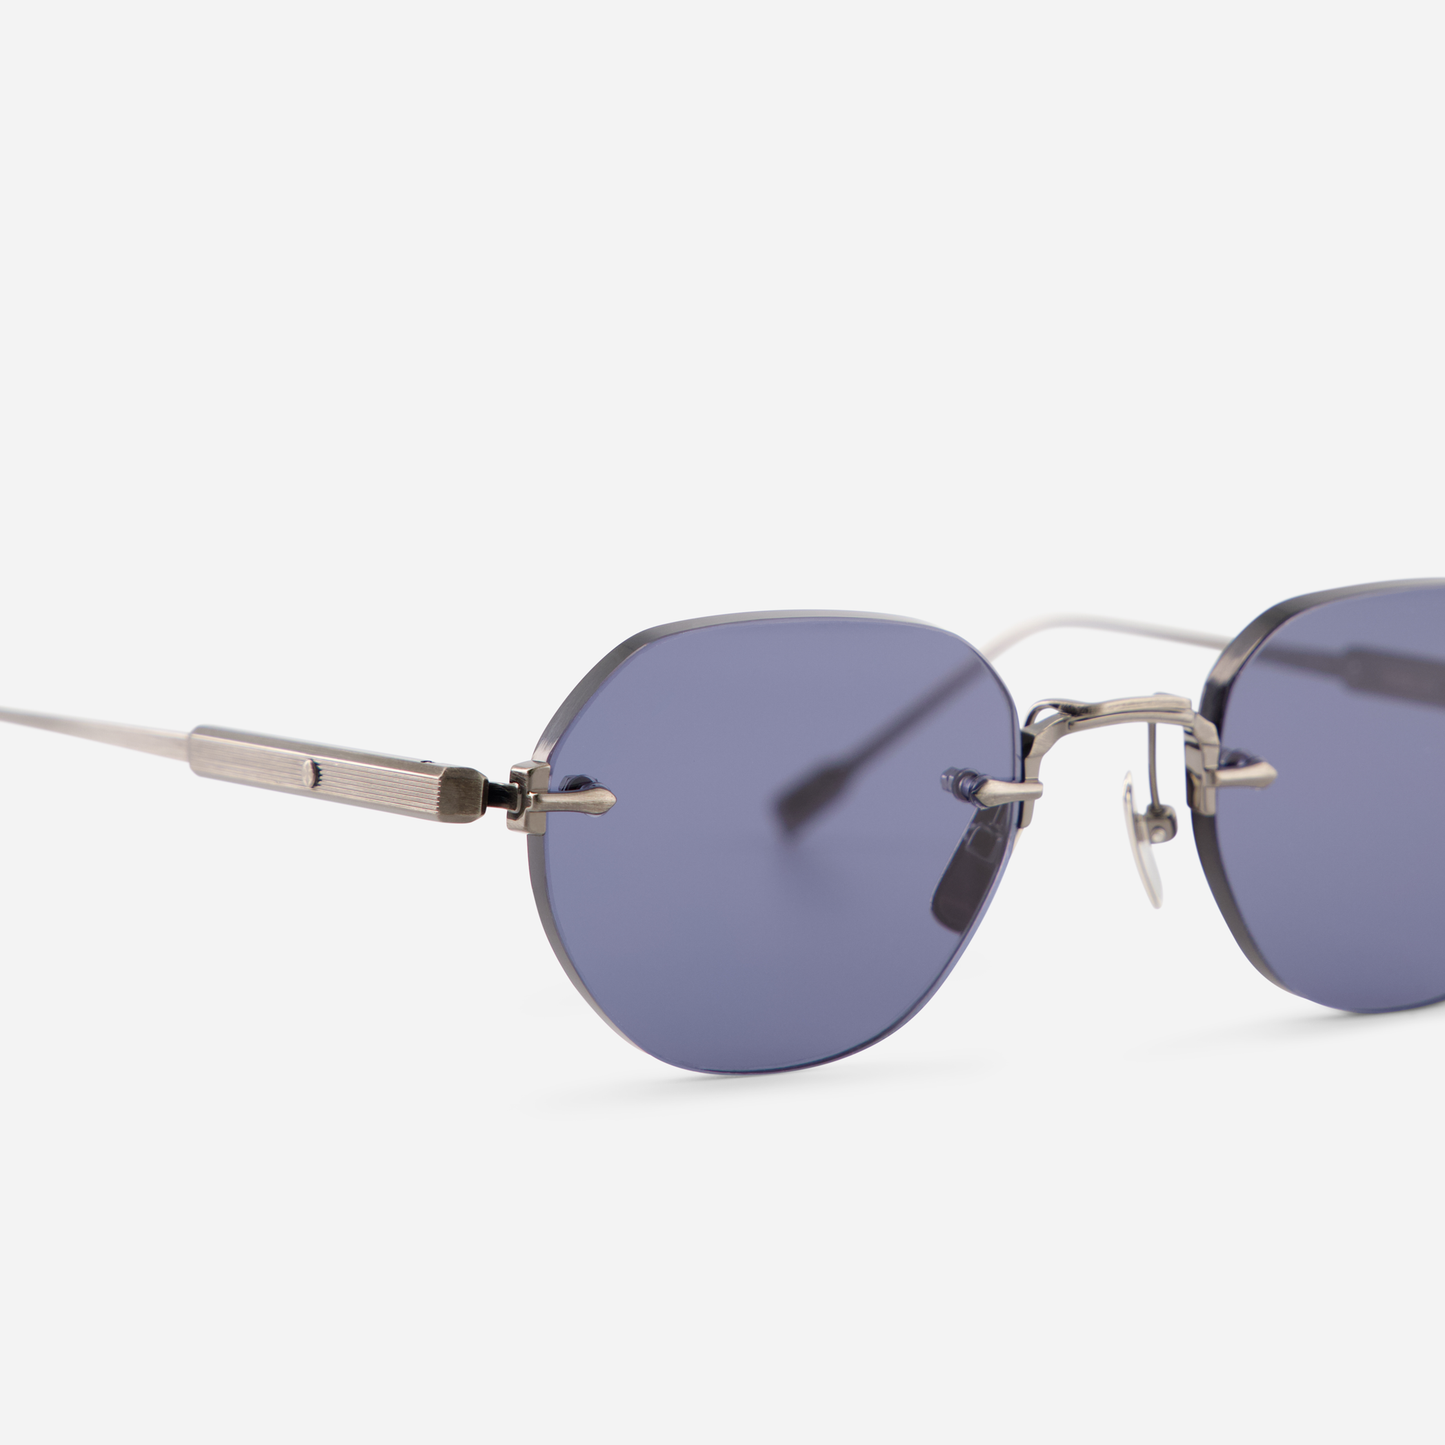 Terebellum I S608, featuring a round Titanium frame with an antique silver finish and stylish blue lenses.